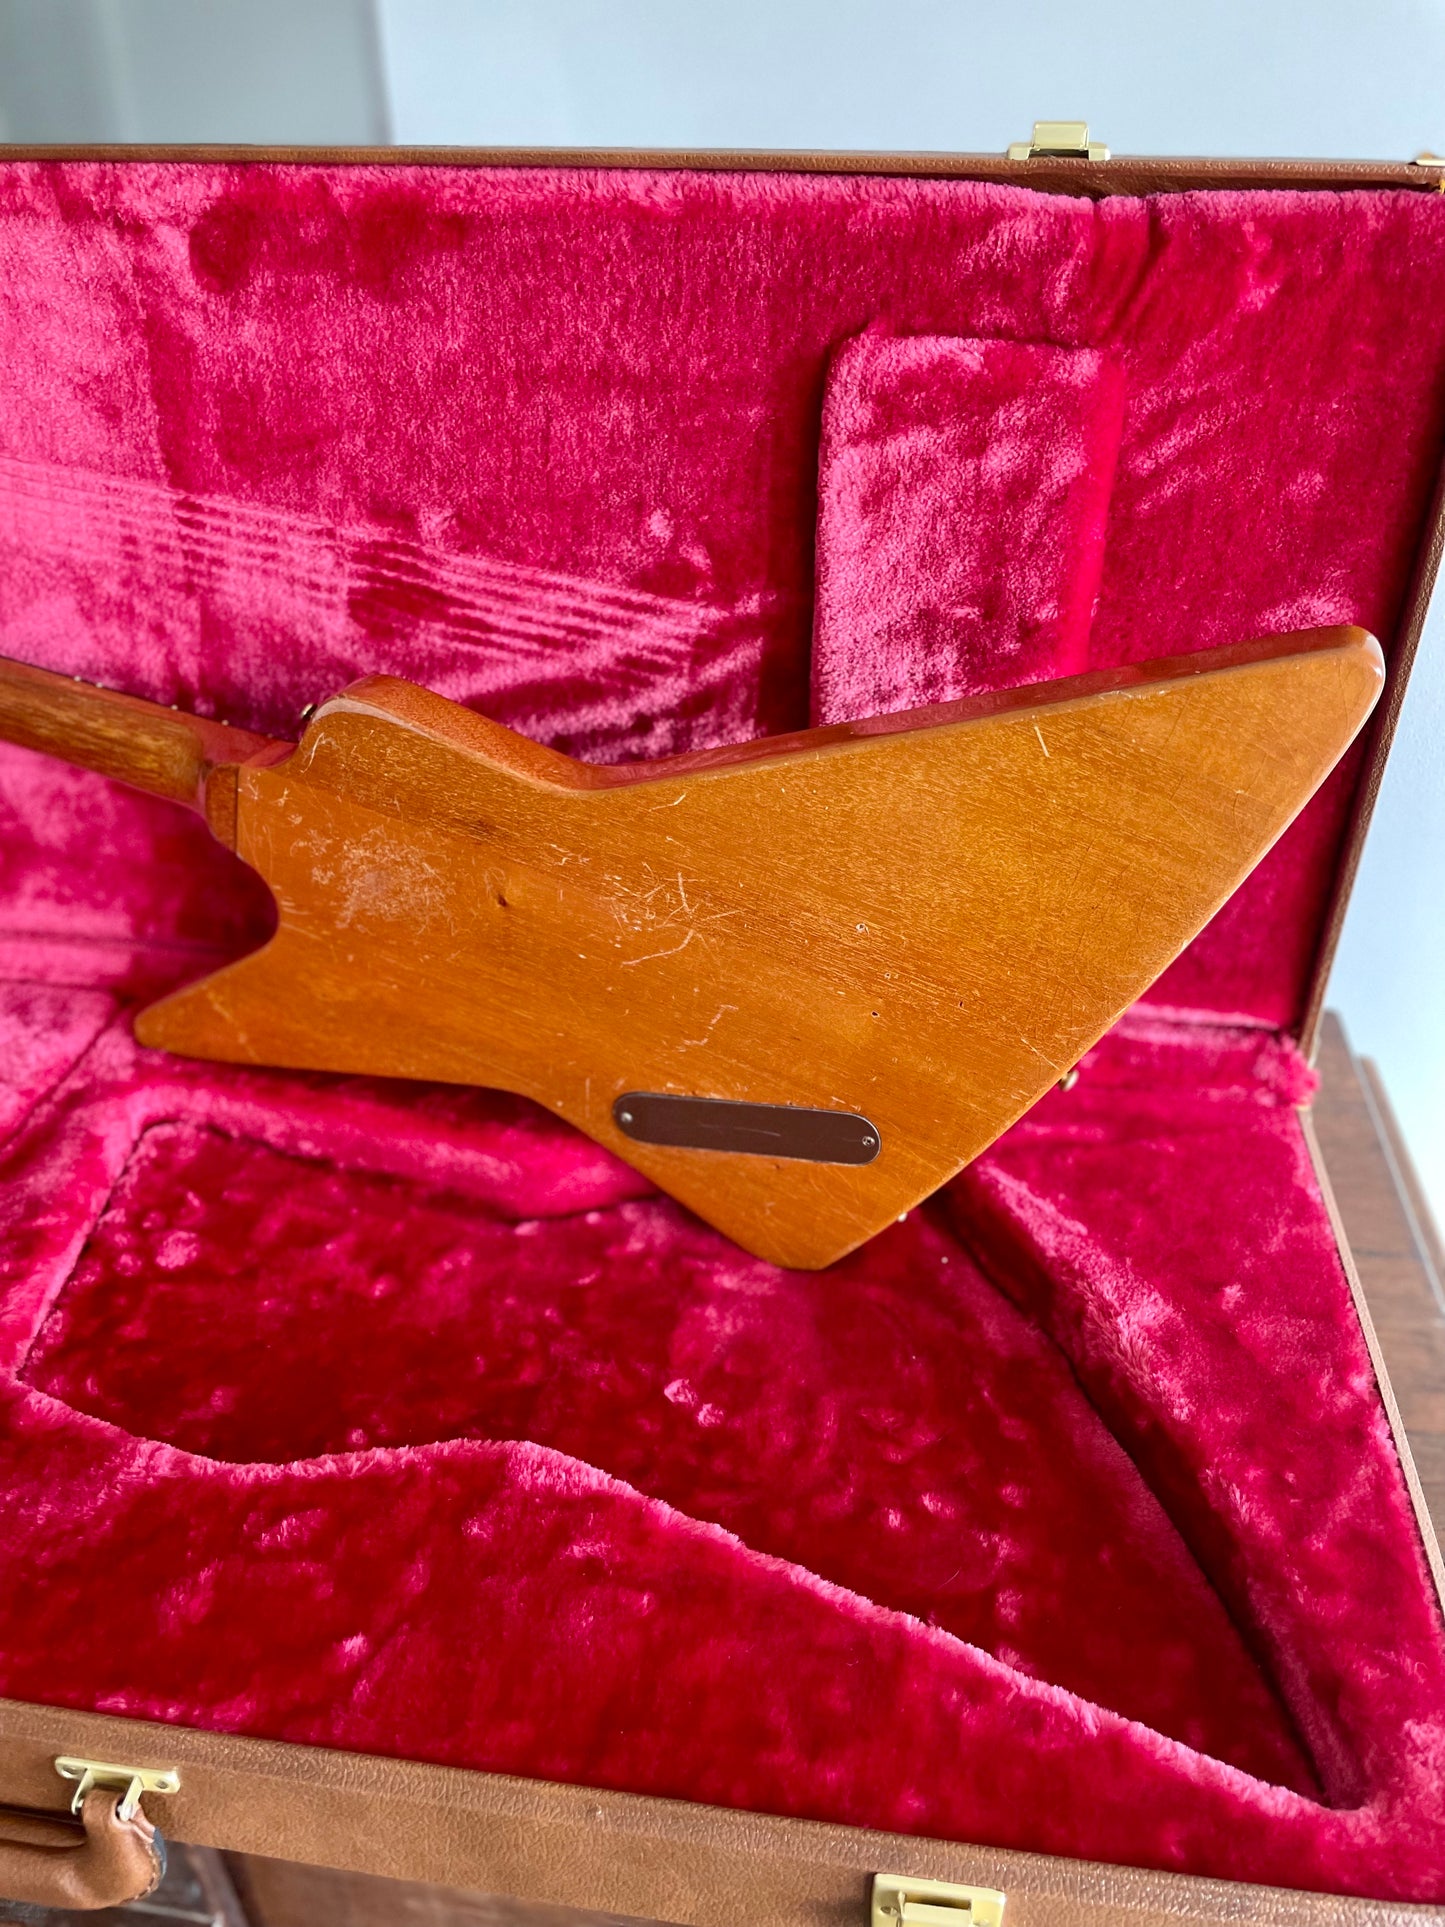 1976 Gibson Explorer Limited Edition